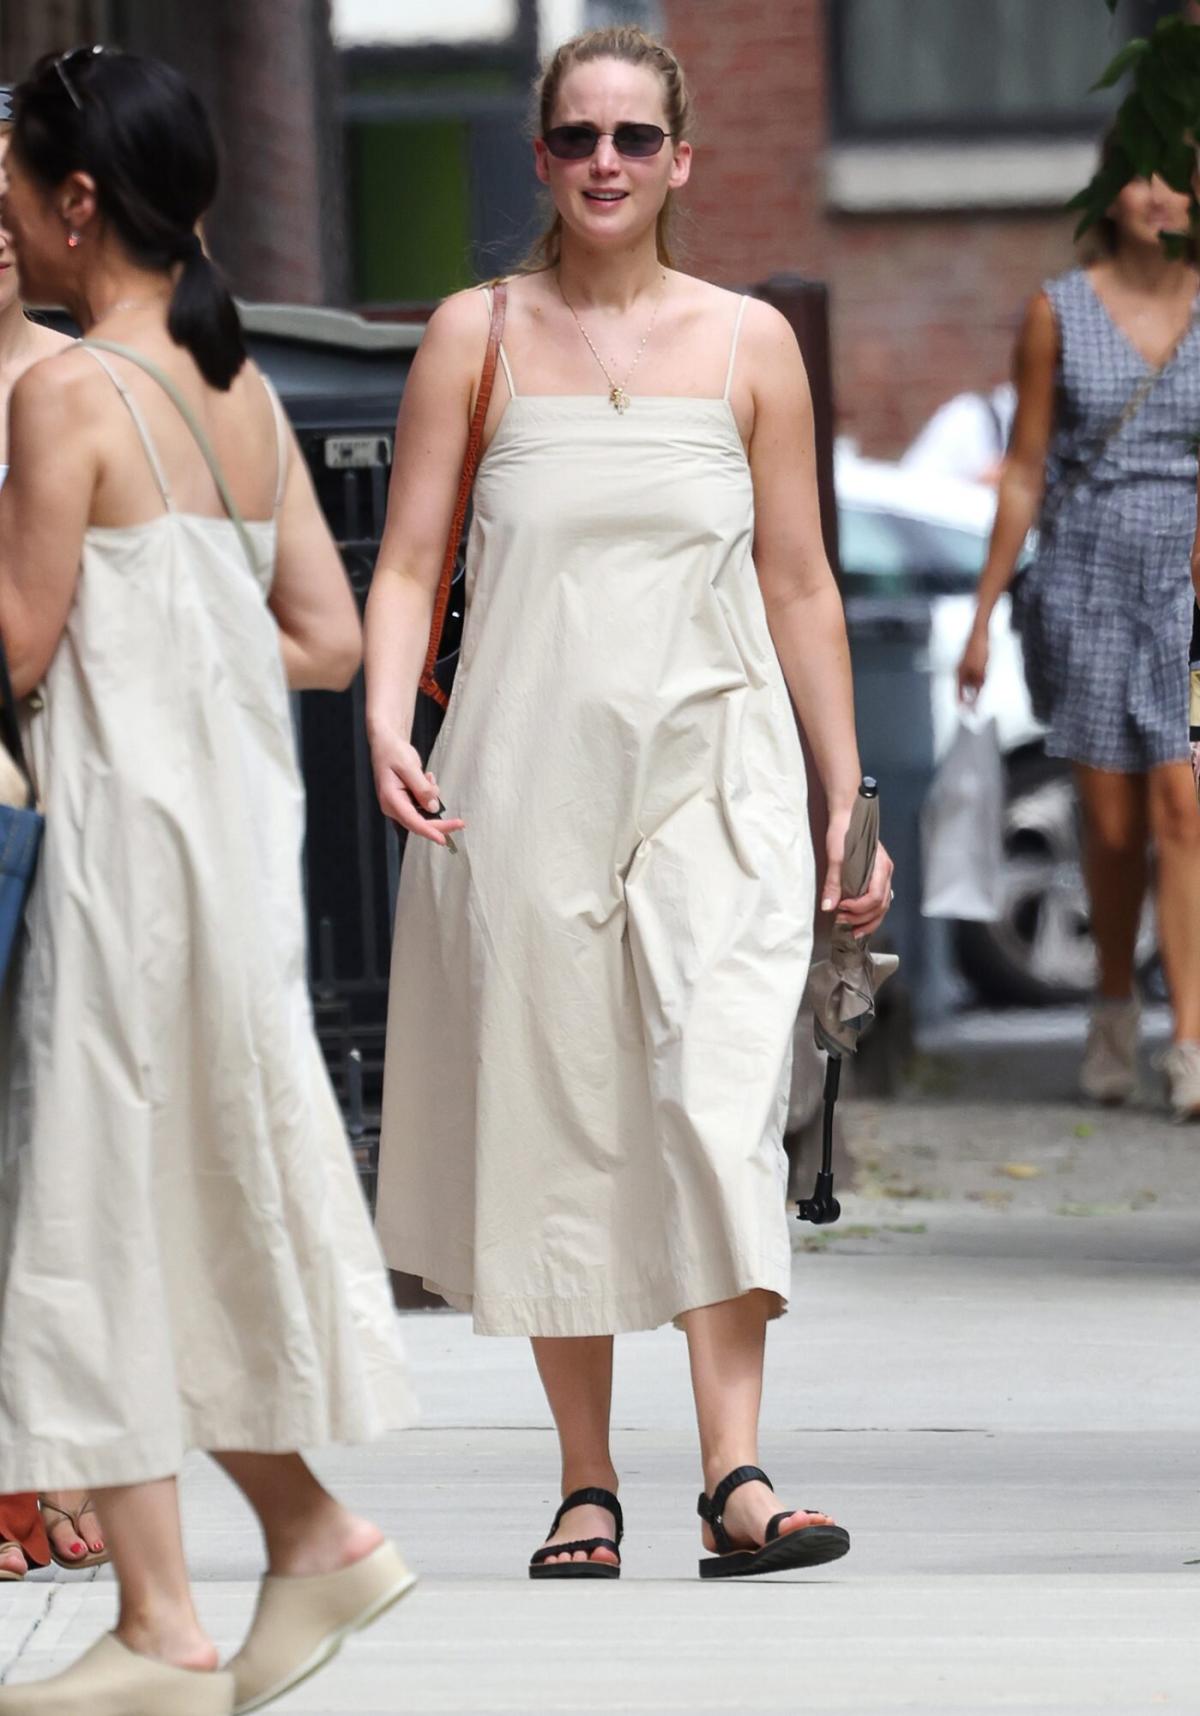 Jennifer Lawrence in step with trends by wearing flip-flops at